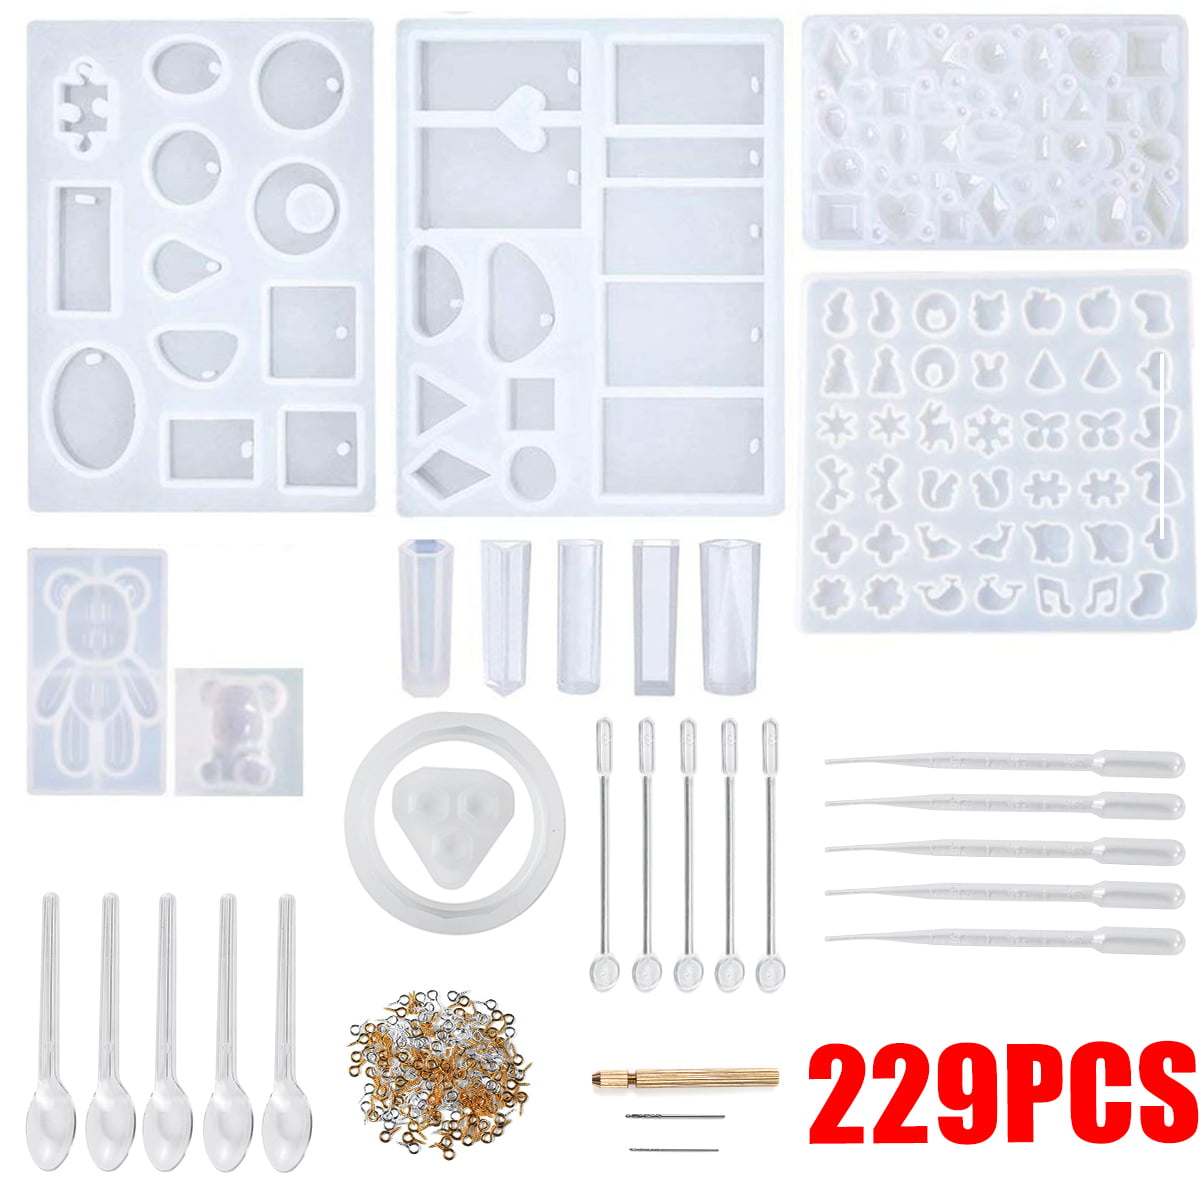 31x DIY Shape Silicone Mold Resin Casting Molds Kit Jewelry Pendant Mould Craft 